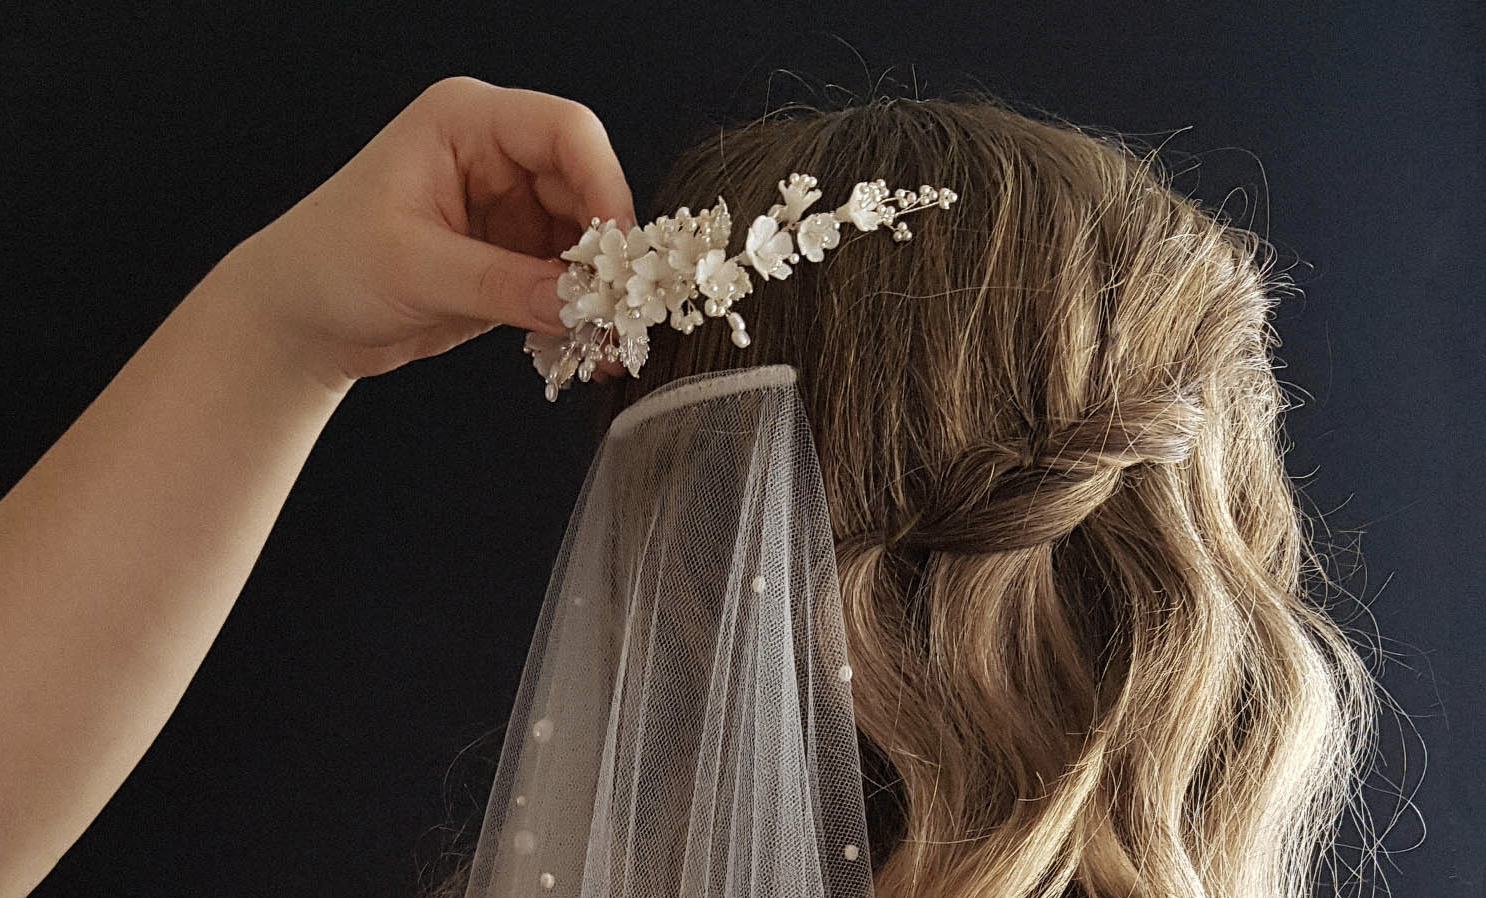 This trick will make sure your veil stays in place